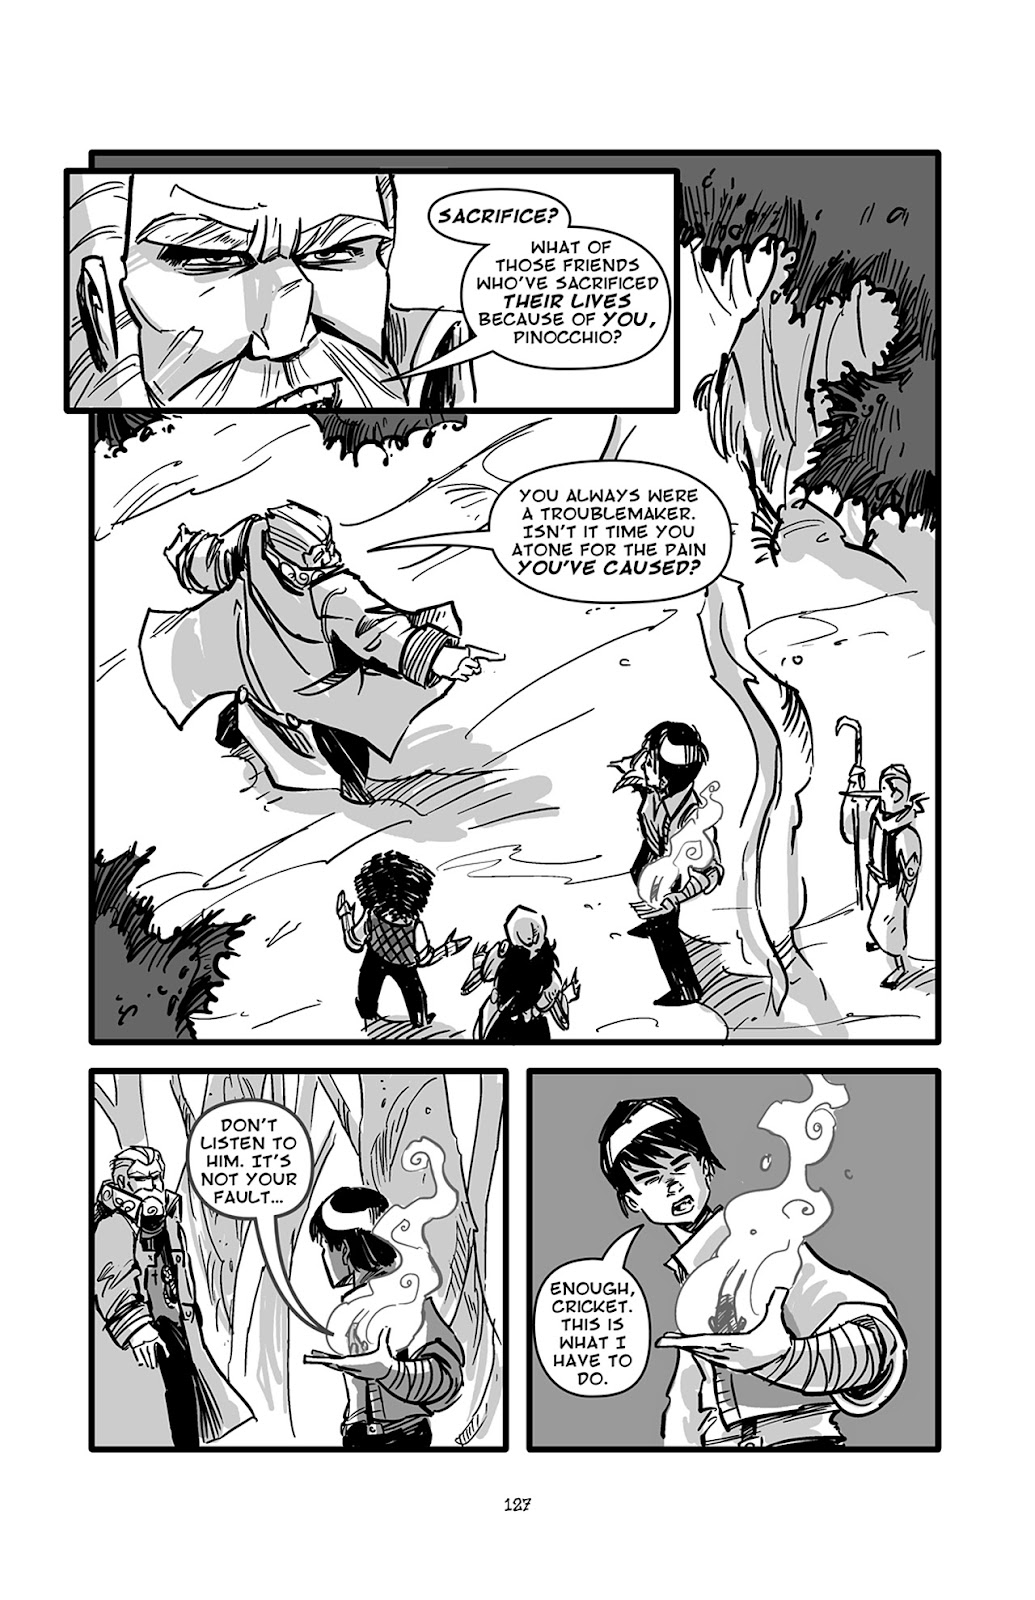 Pinocchio: Vampire Slayer - Of Wood and Blood issue 6 - Page 4